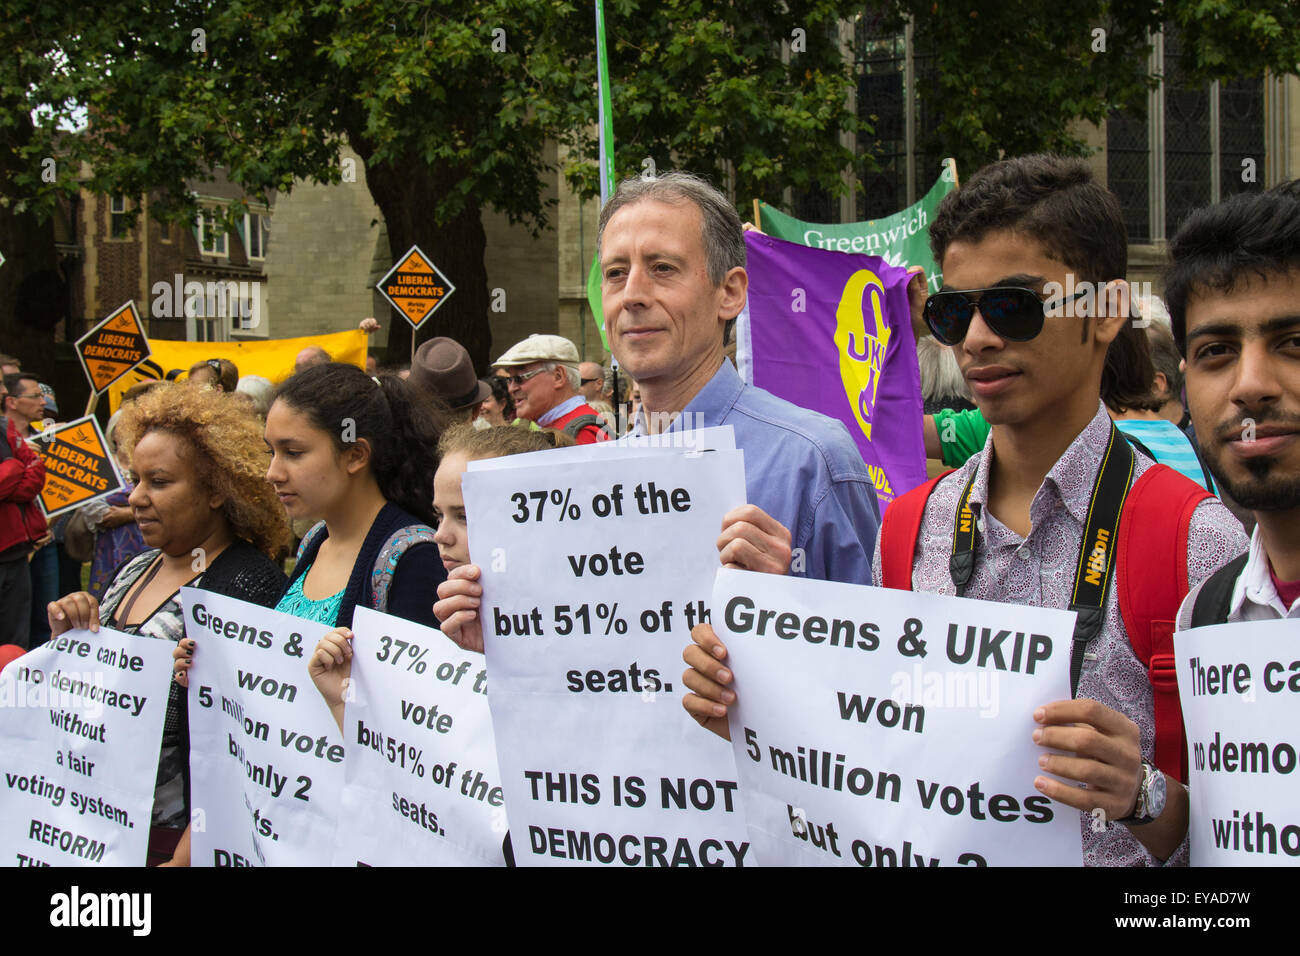 London, UK. 25th July, 2015. Protesters gather outside the Houses of Parliament to demand electoral reform, including proportional representation rather than the first-past-the-post method that saw the Tories gain a majority. PICTURED: Gay and human rights activist Peter Tatchell, centre, is one of many influential people calling for electoral reform. Credit:  Paul Davey/Alamy Live News Stock Photo